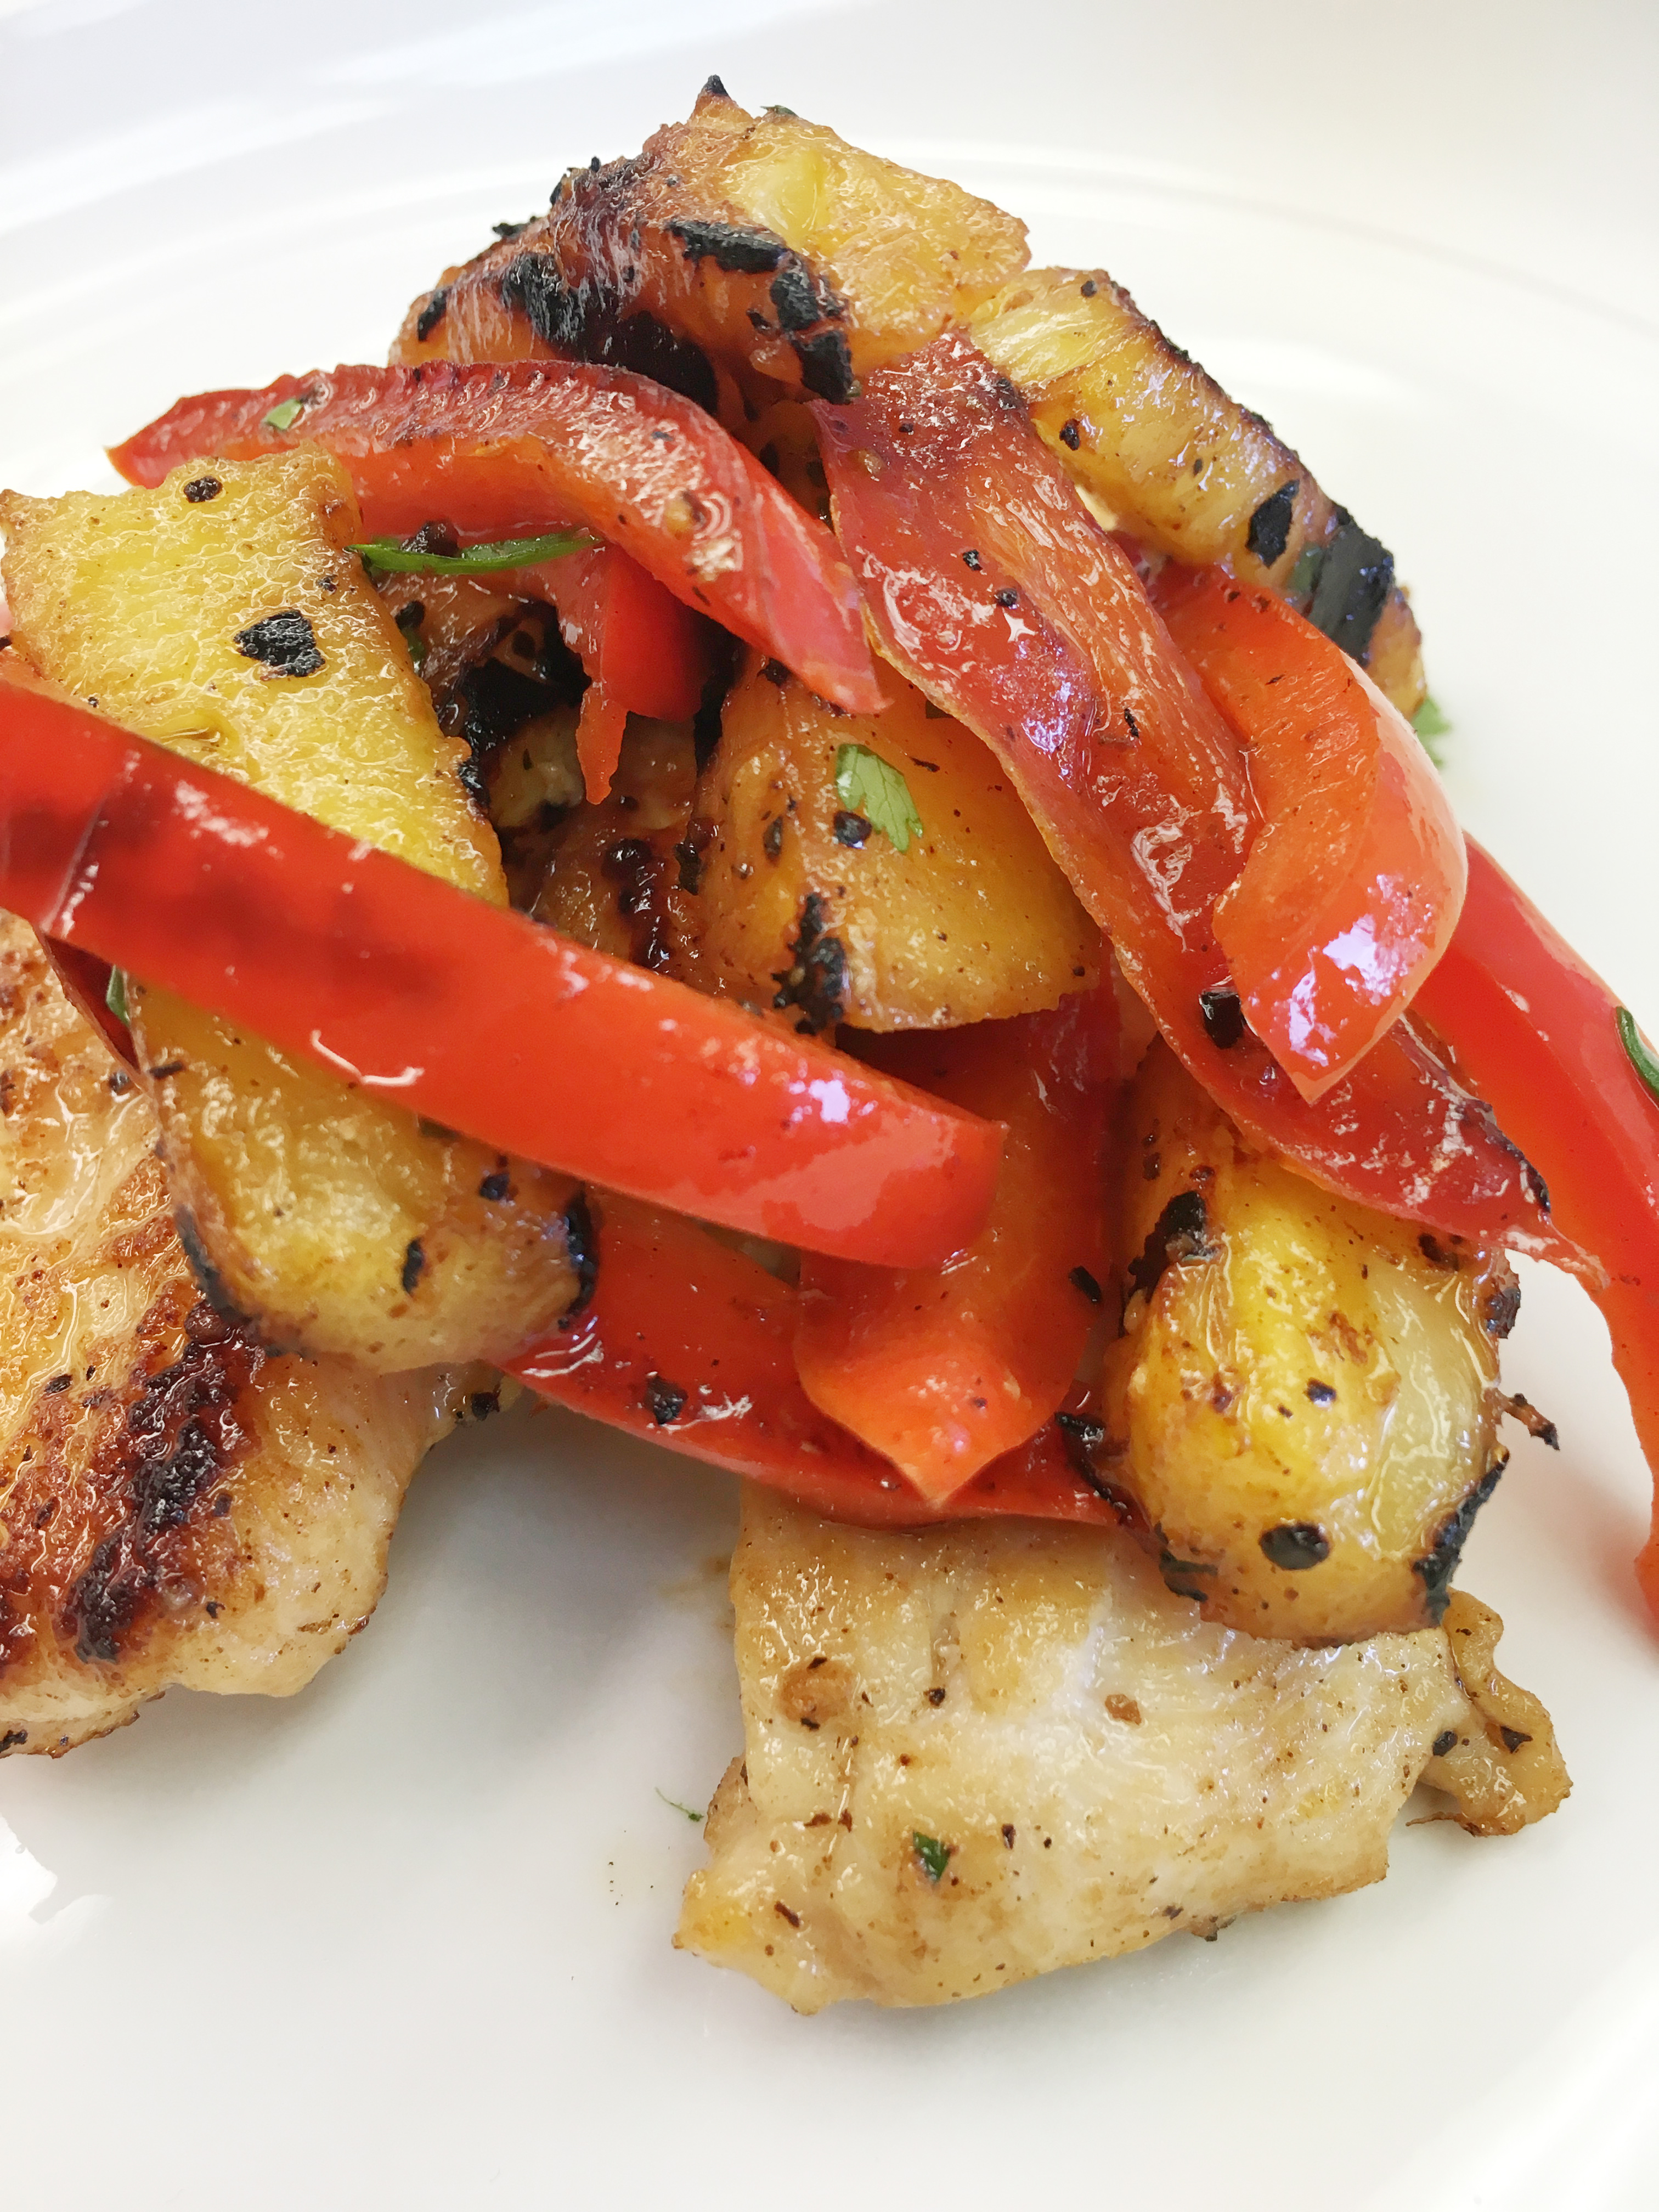 Savoury chicken, with sweet bell peppers & pineapples - these flavors meld together perfectly.